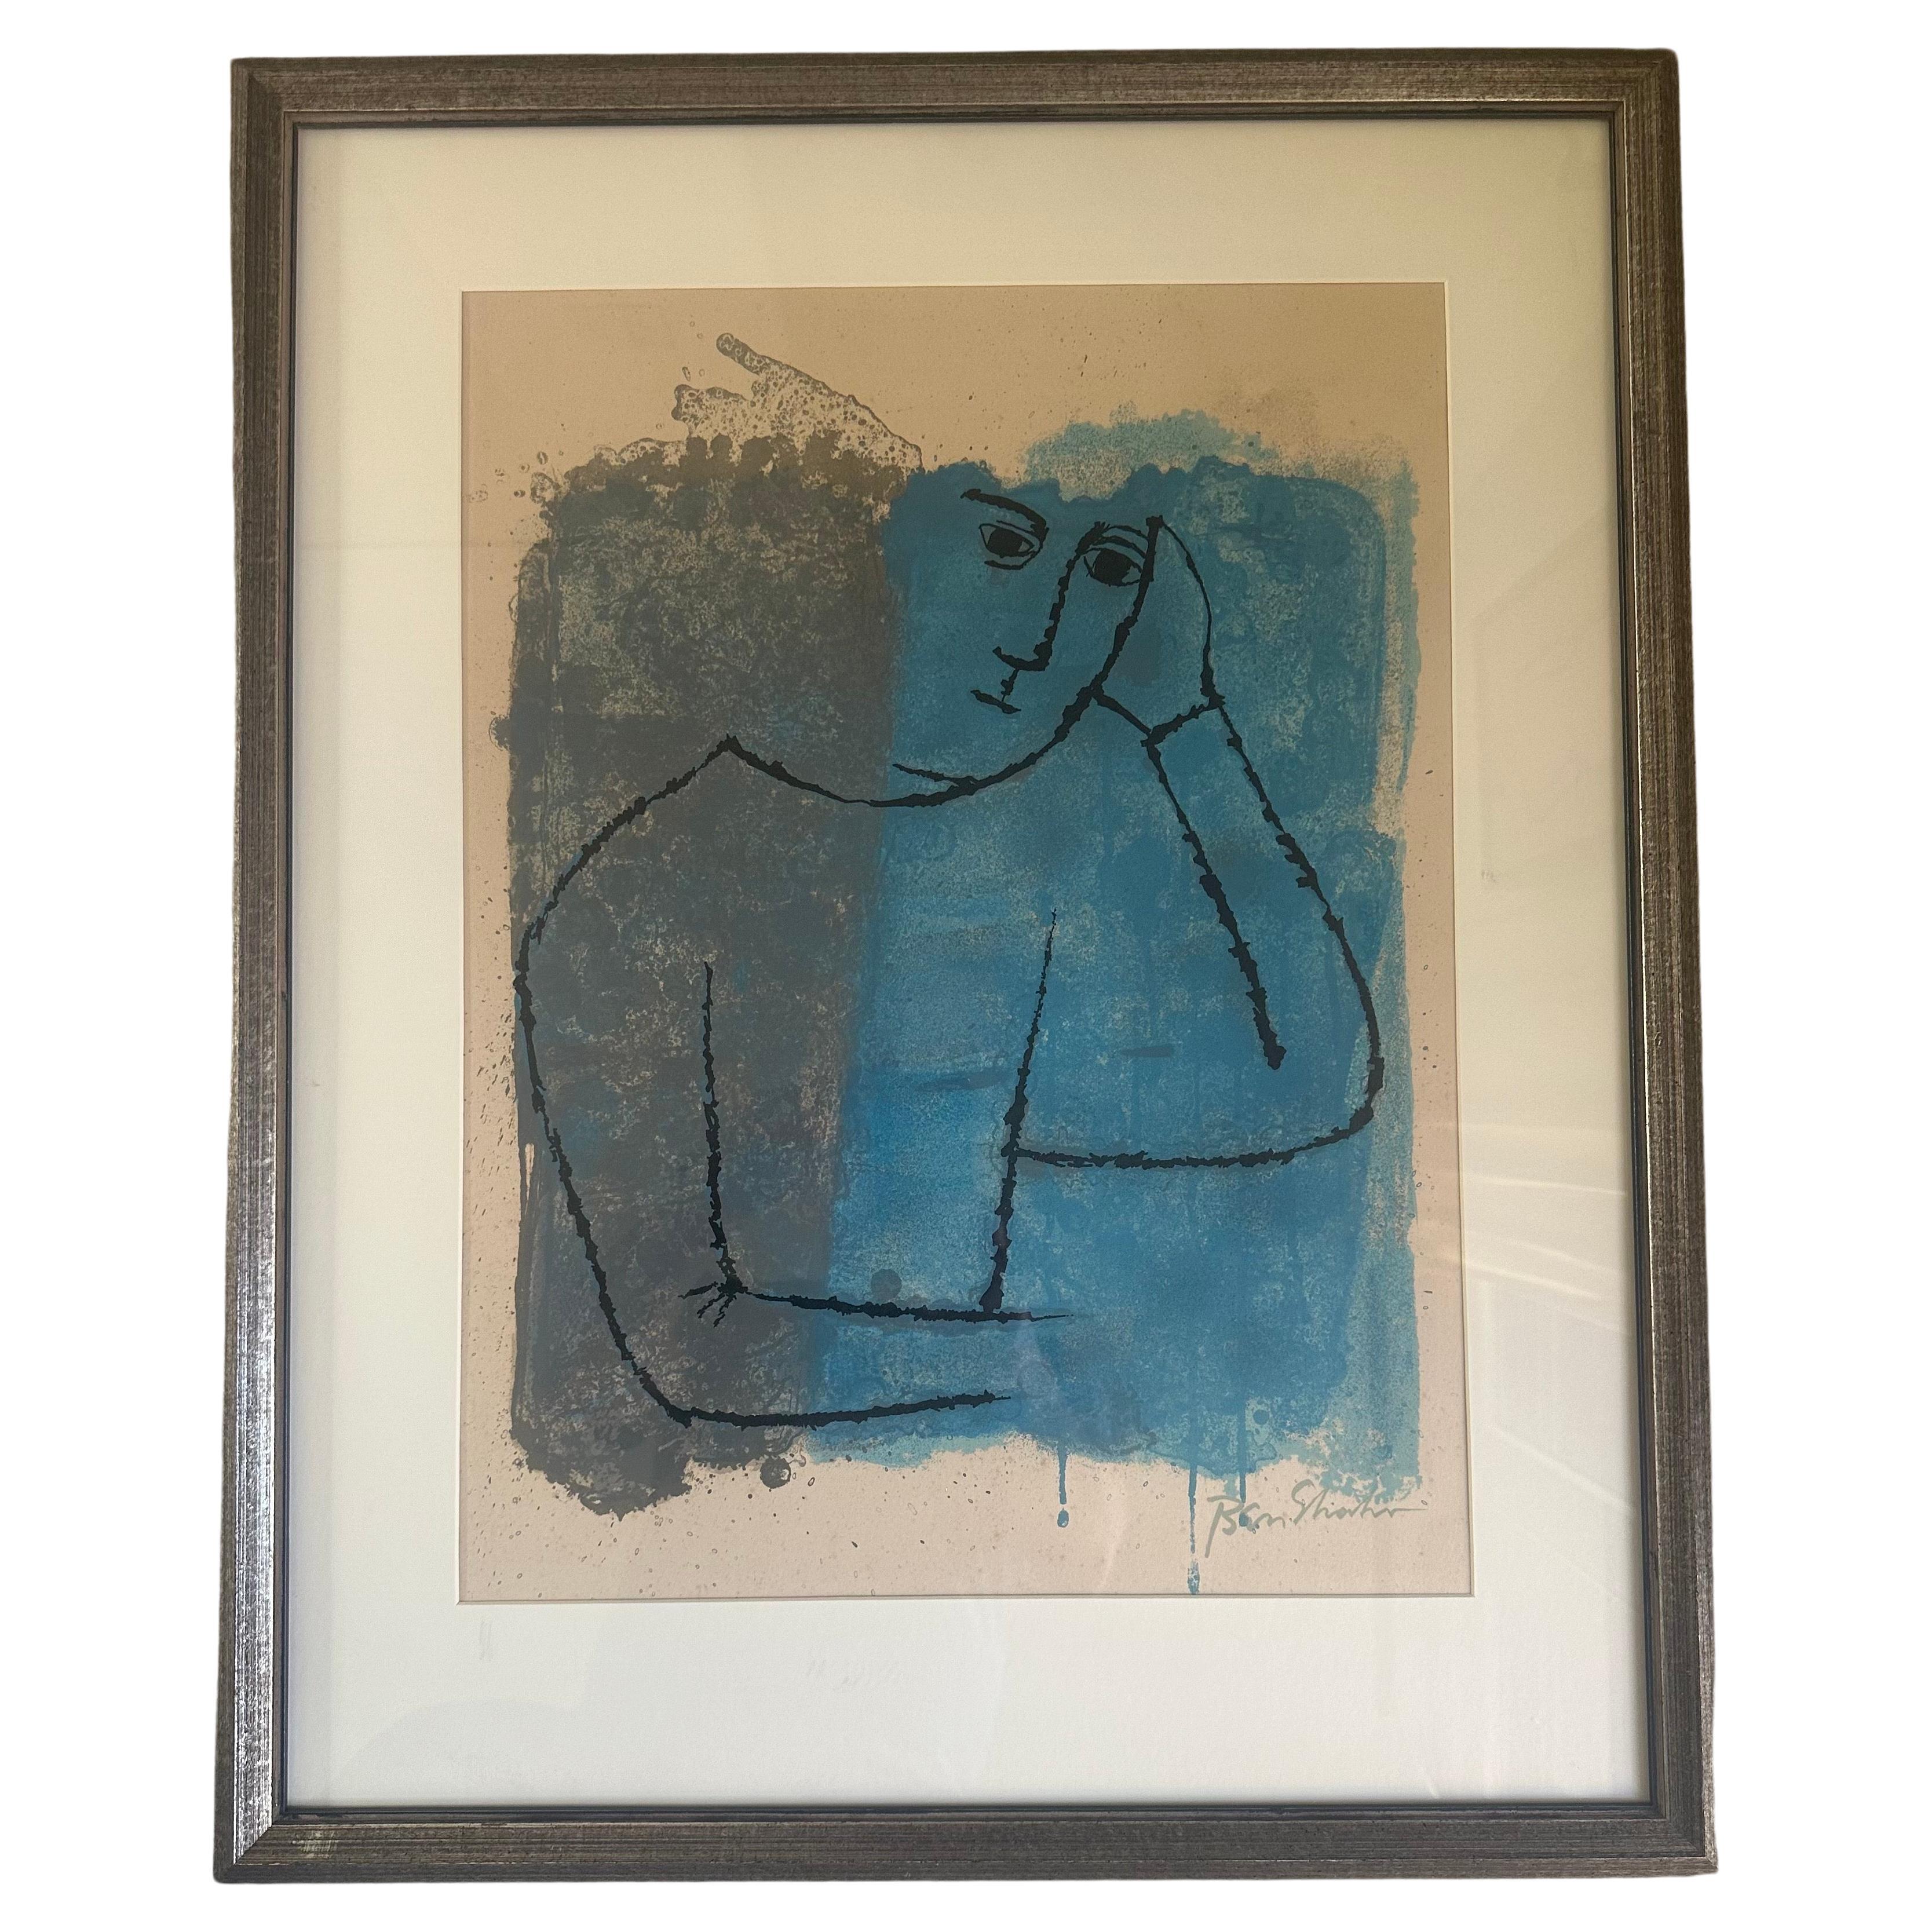 "In Rooms Withdrawn and Quiet" Stone Lithograph by Ben Shahn